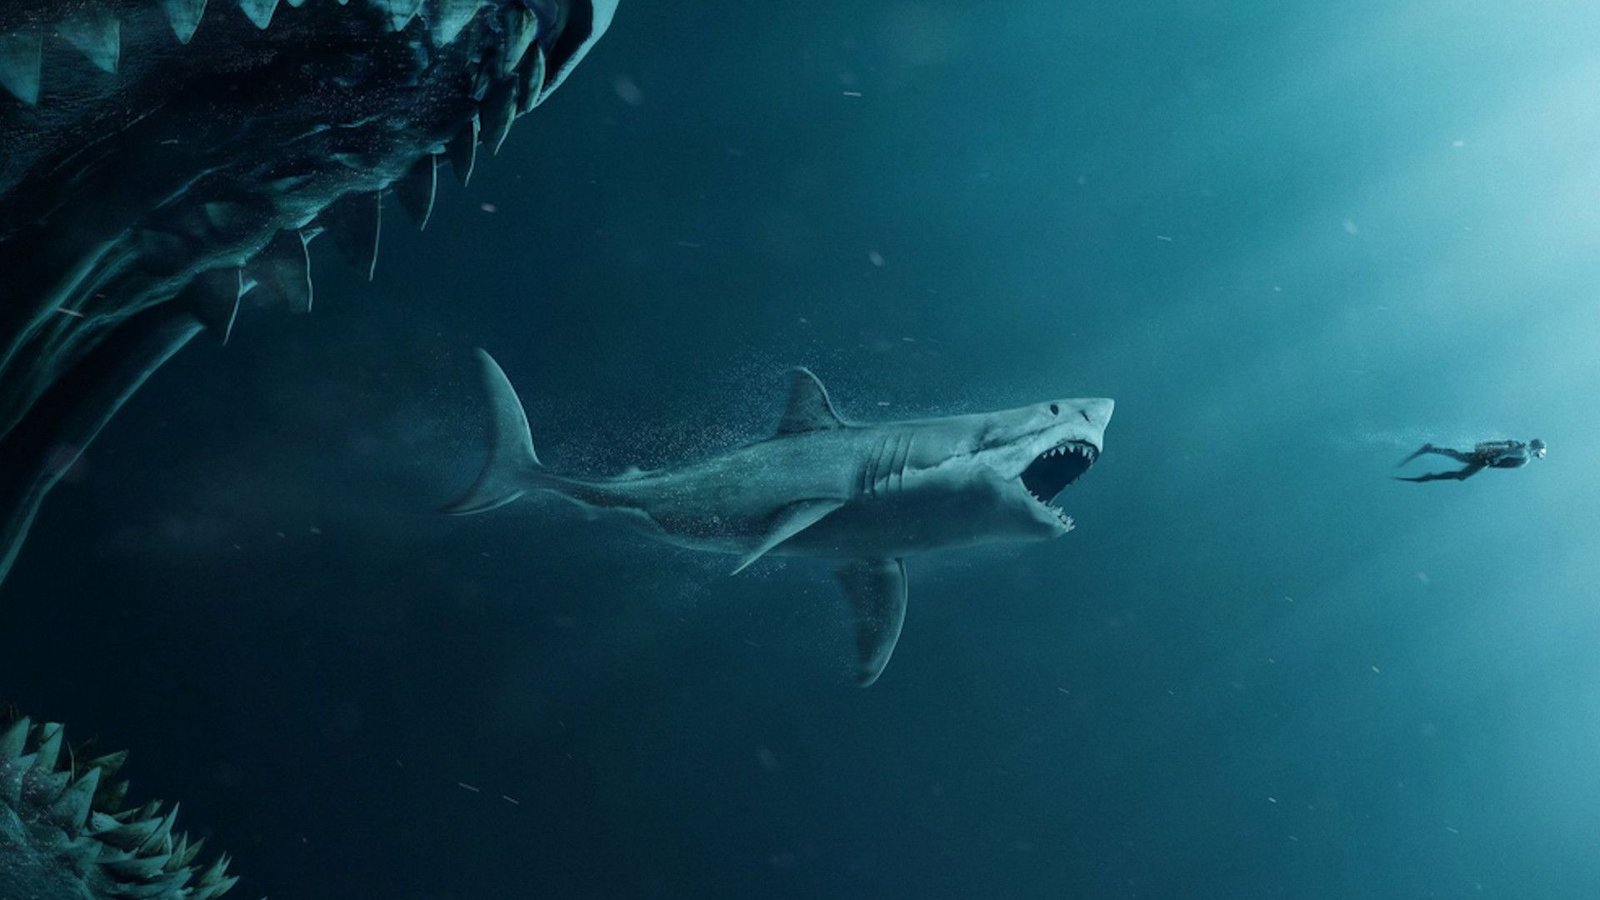 The 47 Meters Down Franchise Is Getting a Third Entry With Patrick Lussier Directing